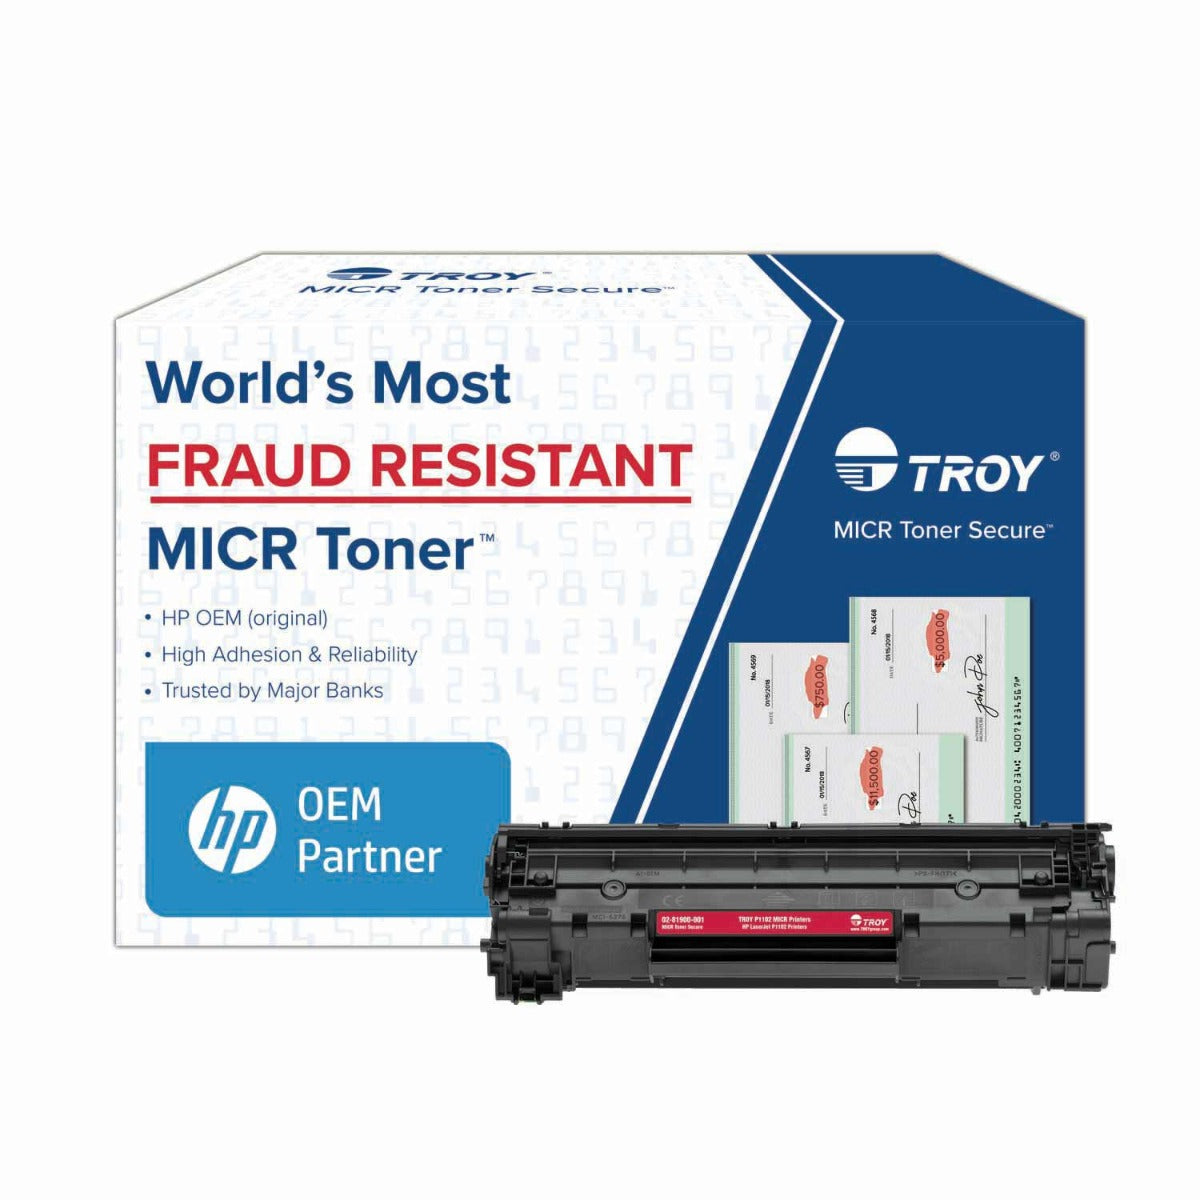 TROY P1102 MICR Toner Secure Standard Yield Cartridge (Coordinating HP Part Number: CE285A)